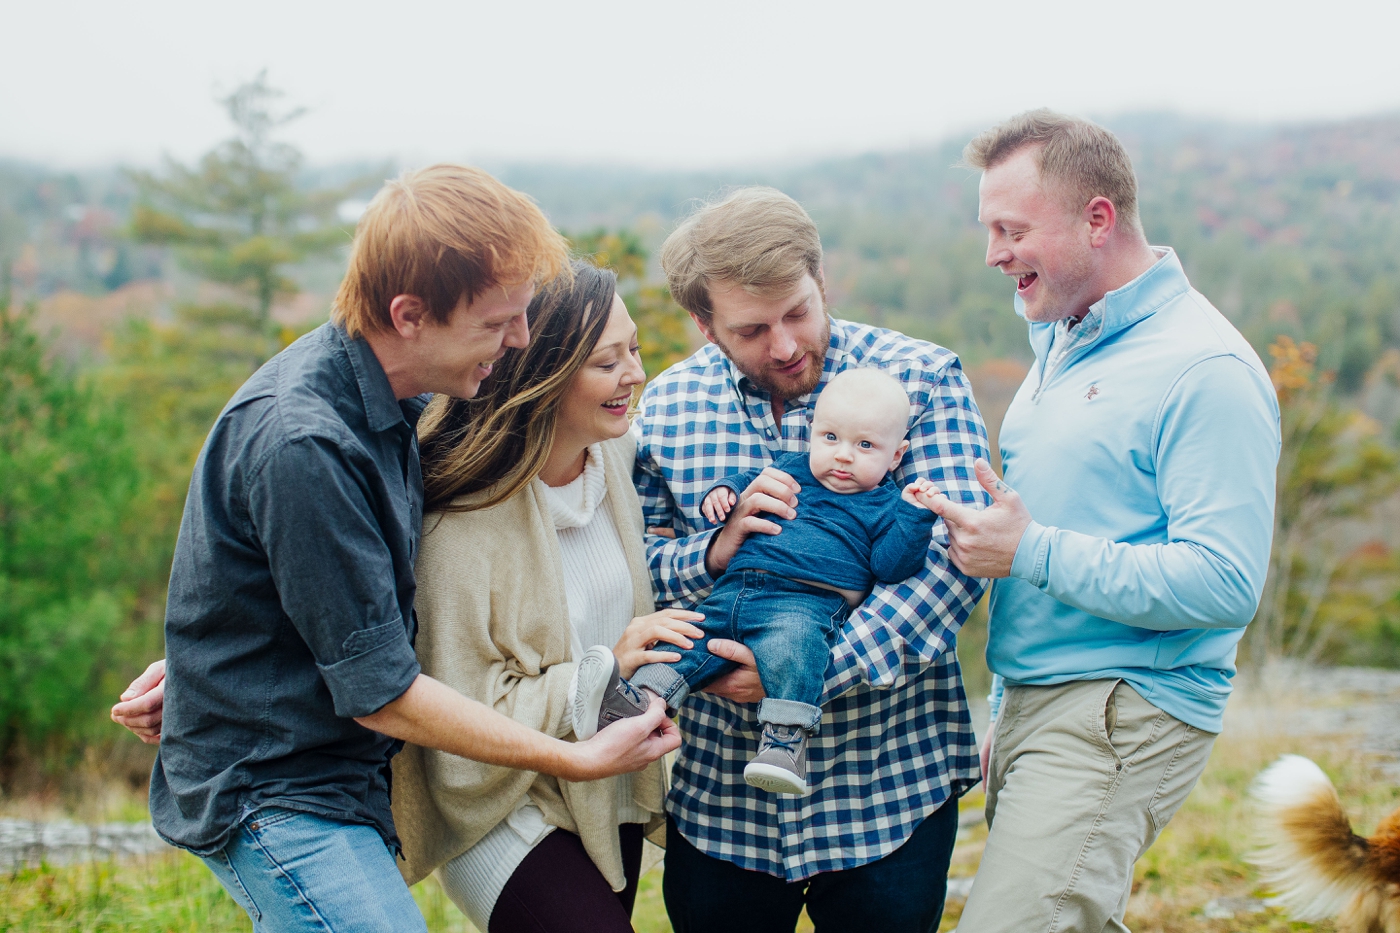 Highlands family session – Family photography by Izzy and Co.